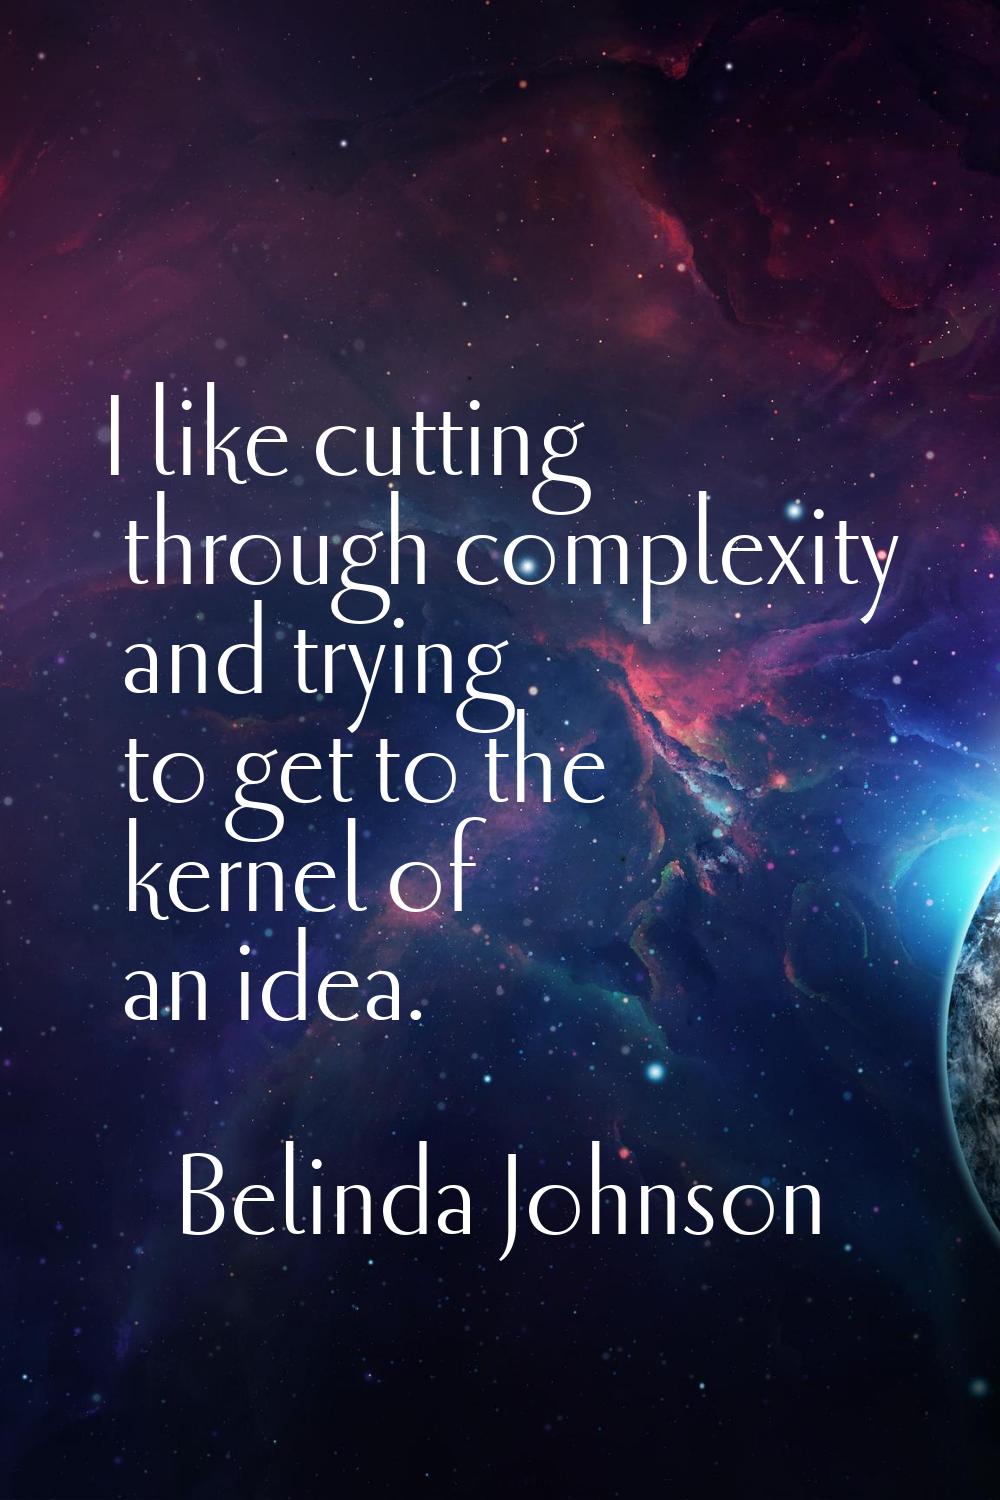 I like cutting through complexity and trying to get to the kernel of an idea.